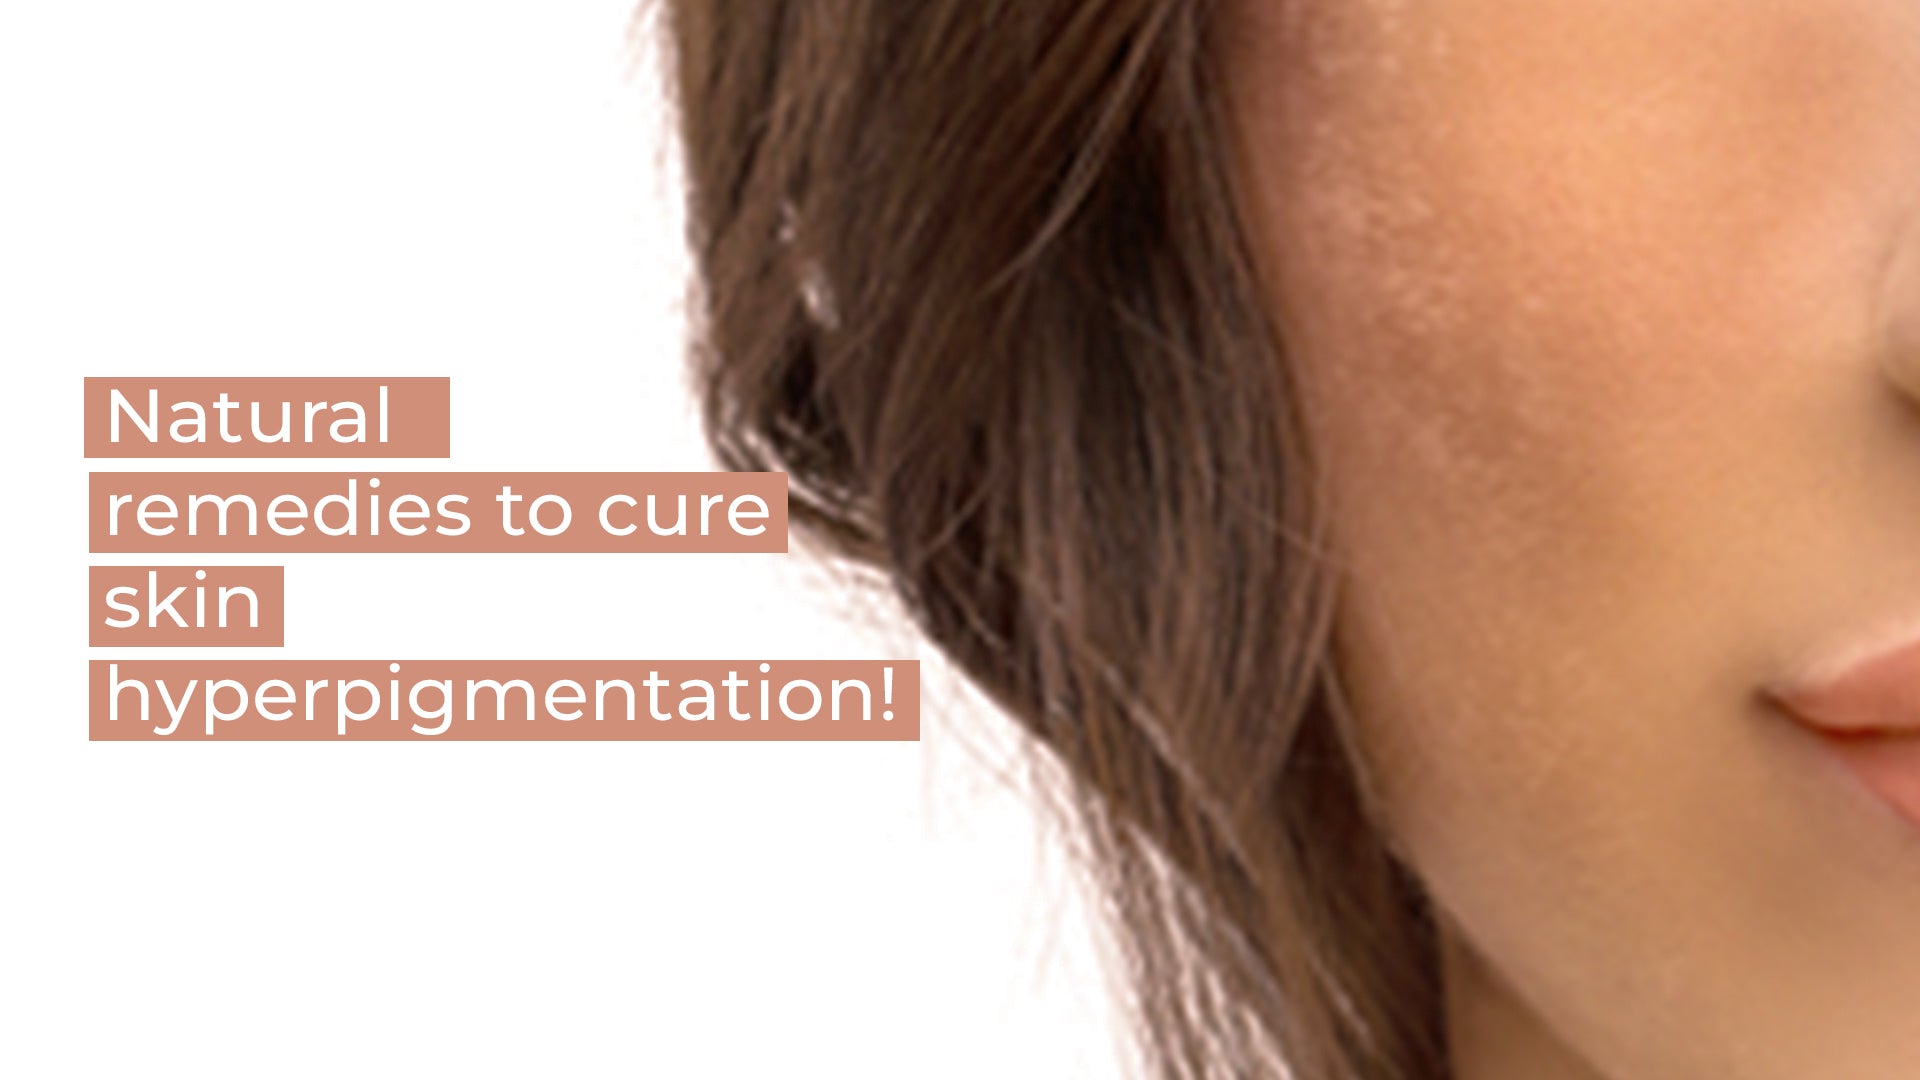 Your skin care journal: Natural remedies to cure skin hyperpigmentation!